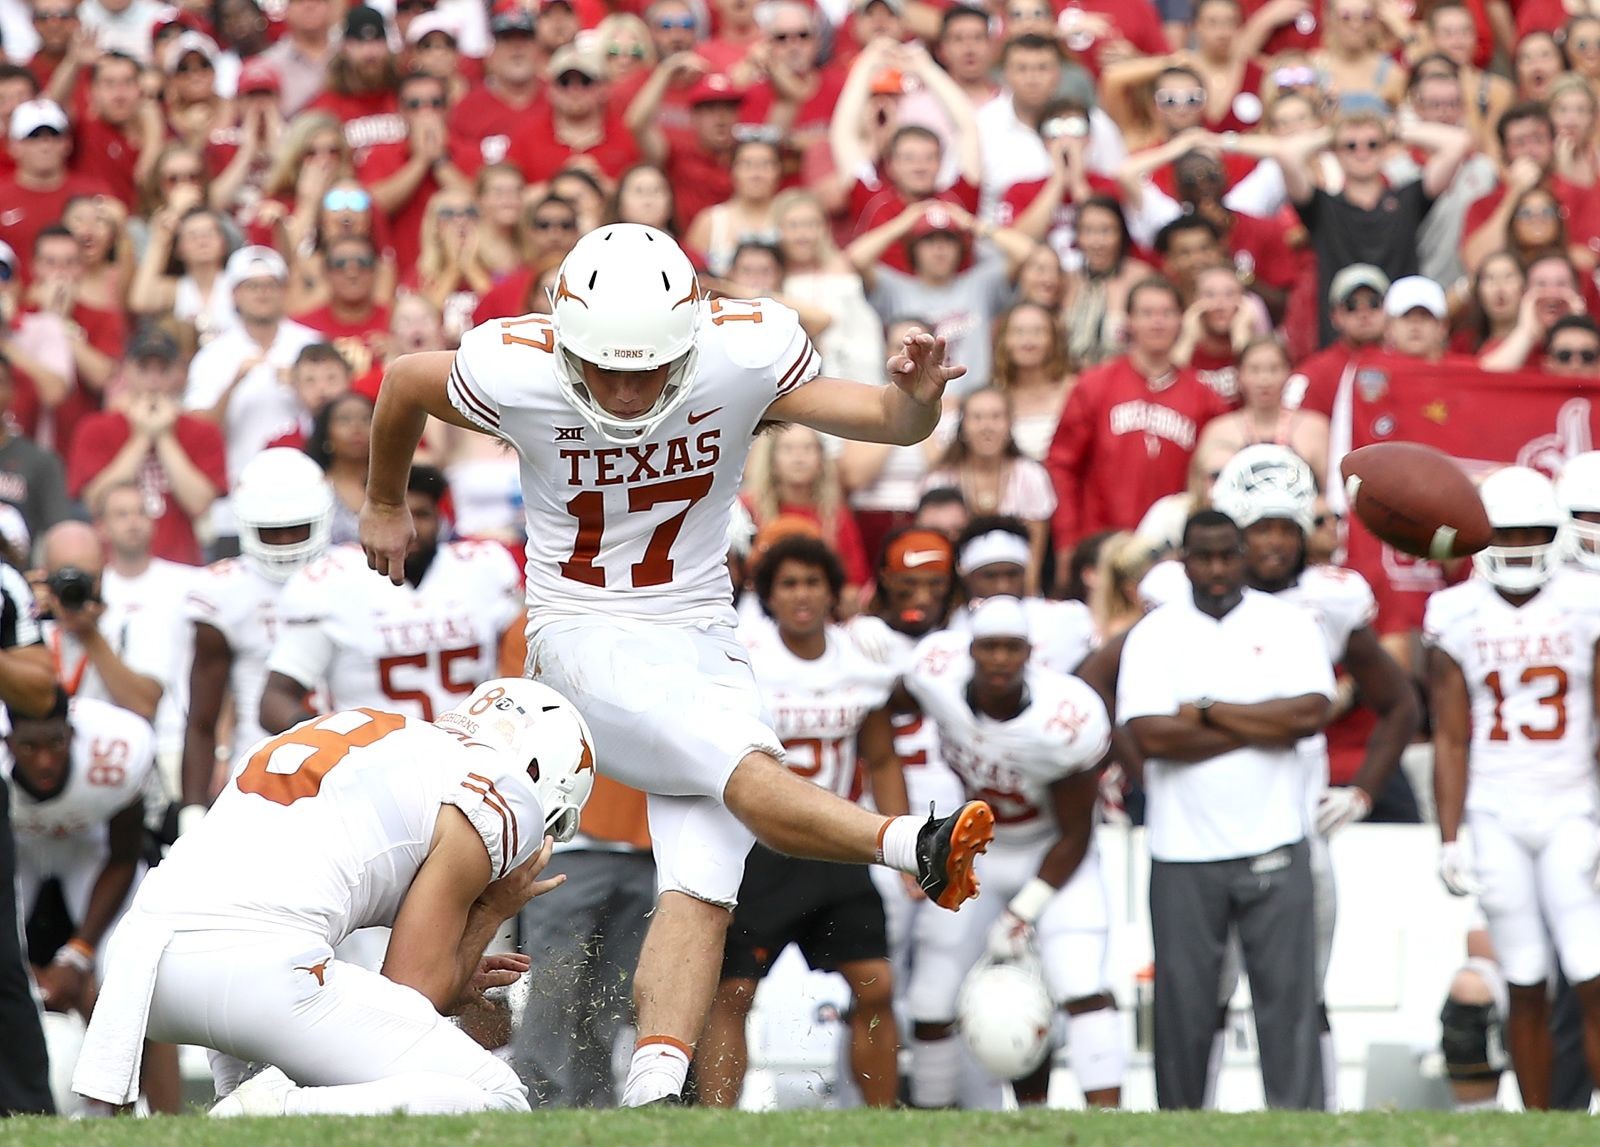 Texas Football: Cameron Dicker rightly gets Big 12 Special Teams honors